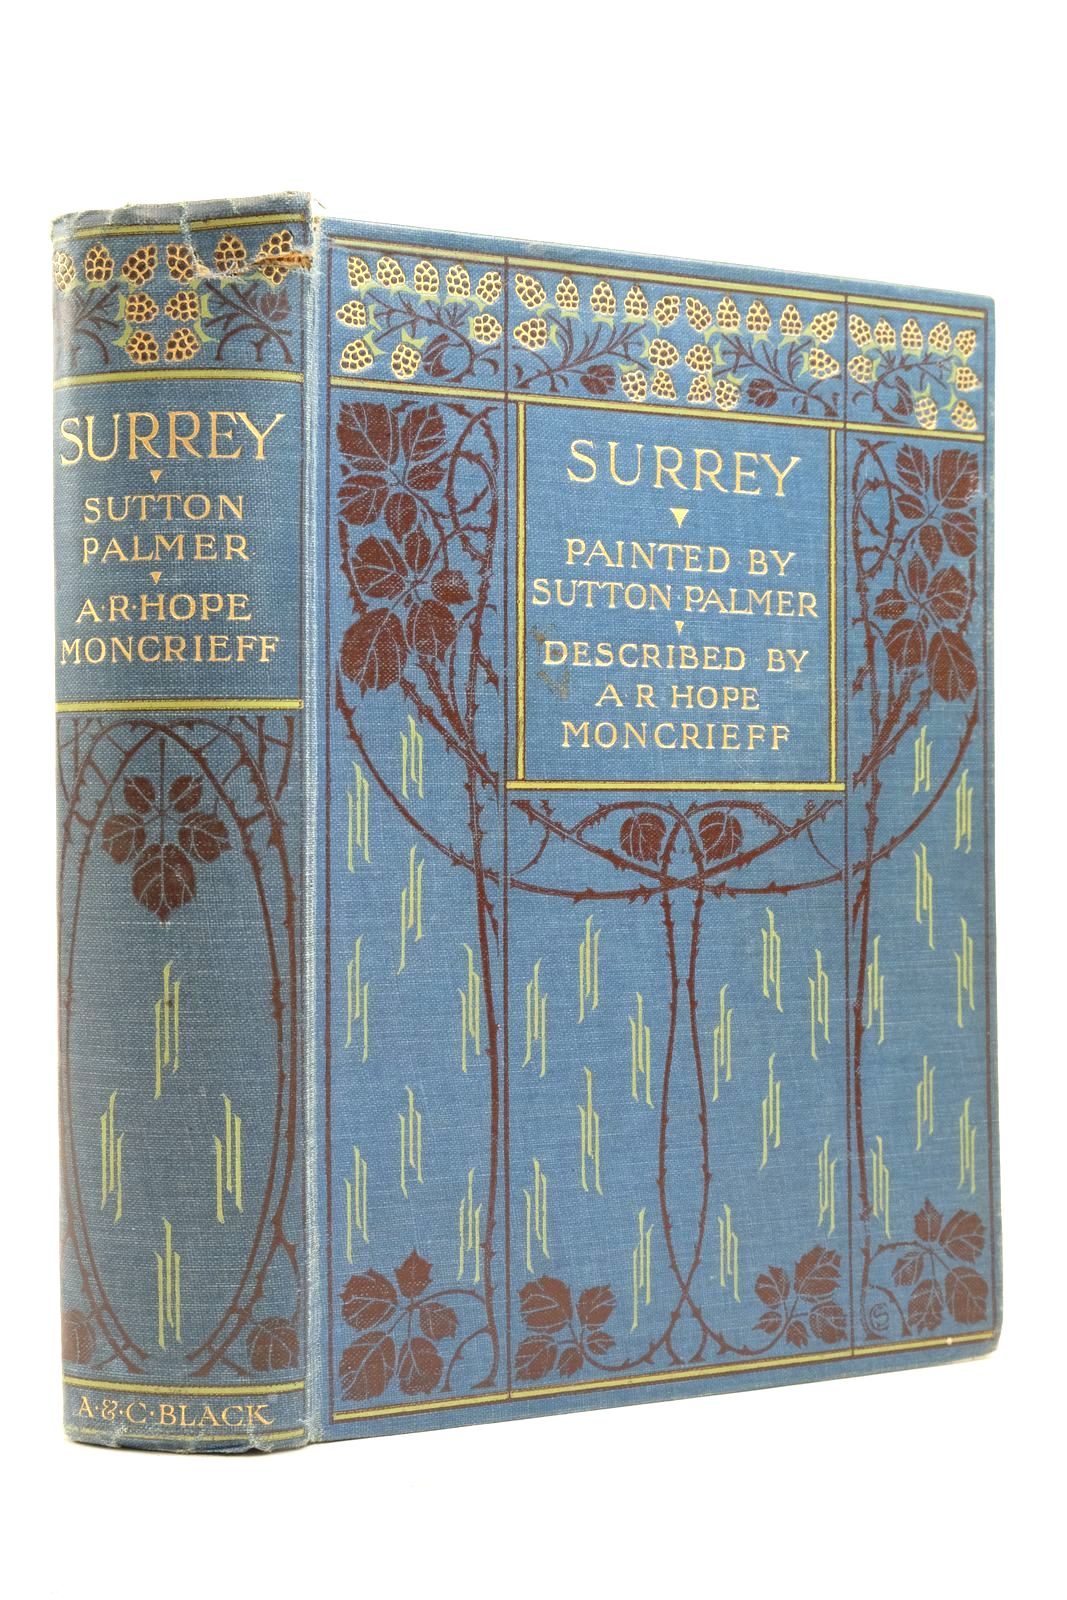 Photo of SURREY written by Moncrieff, A.R. Hope illustrated by Palmer, Sutton published by A. & C. Black (STOCK CODE: 2137601)  for sale by Stella & Rose's Books